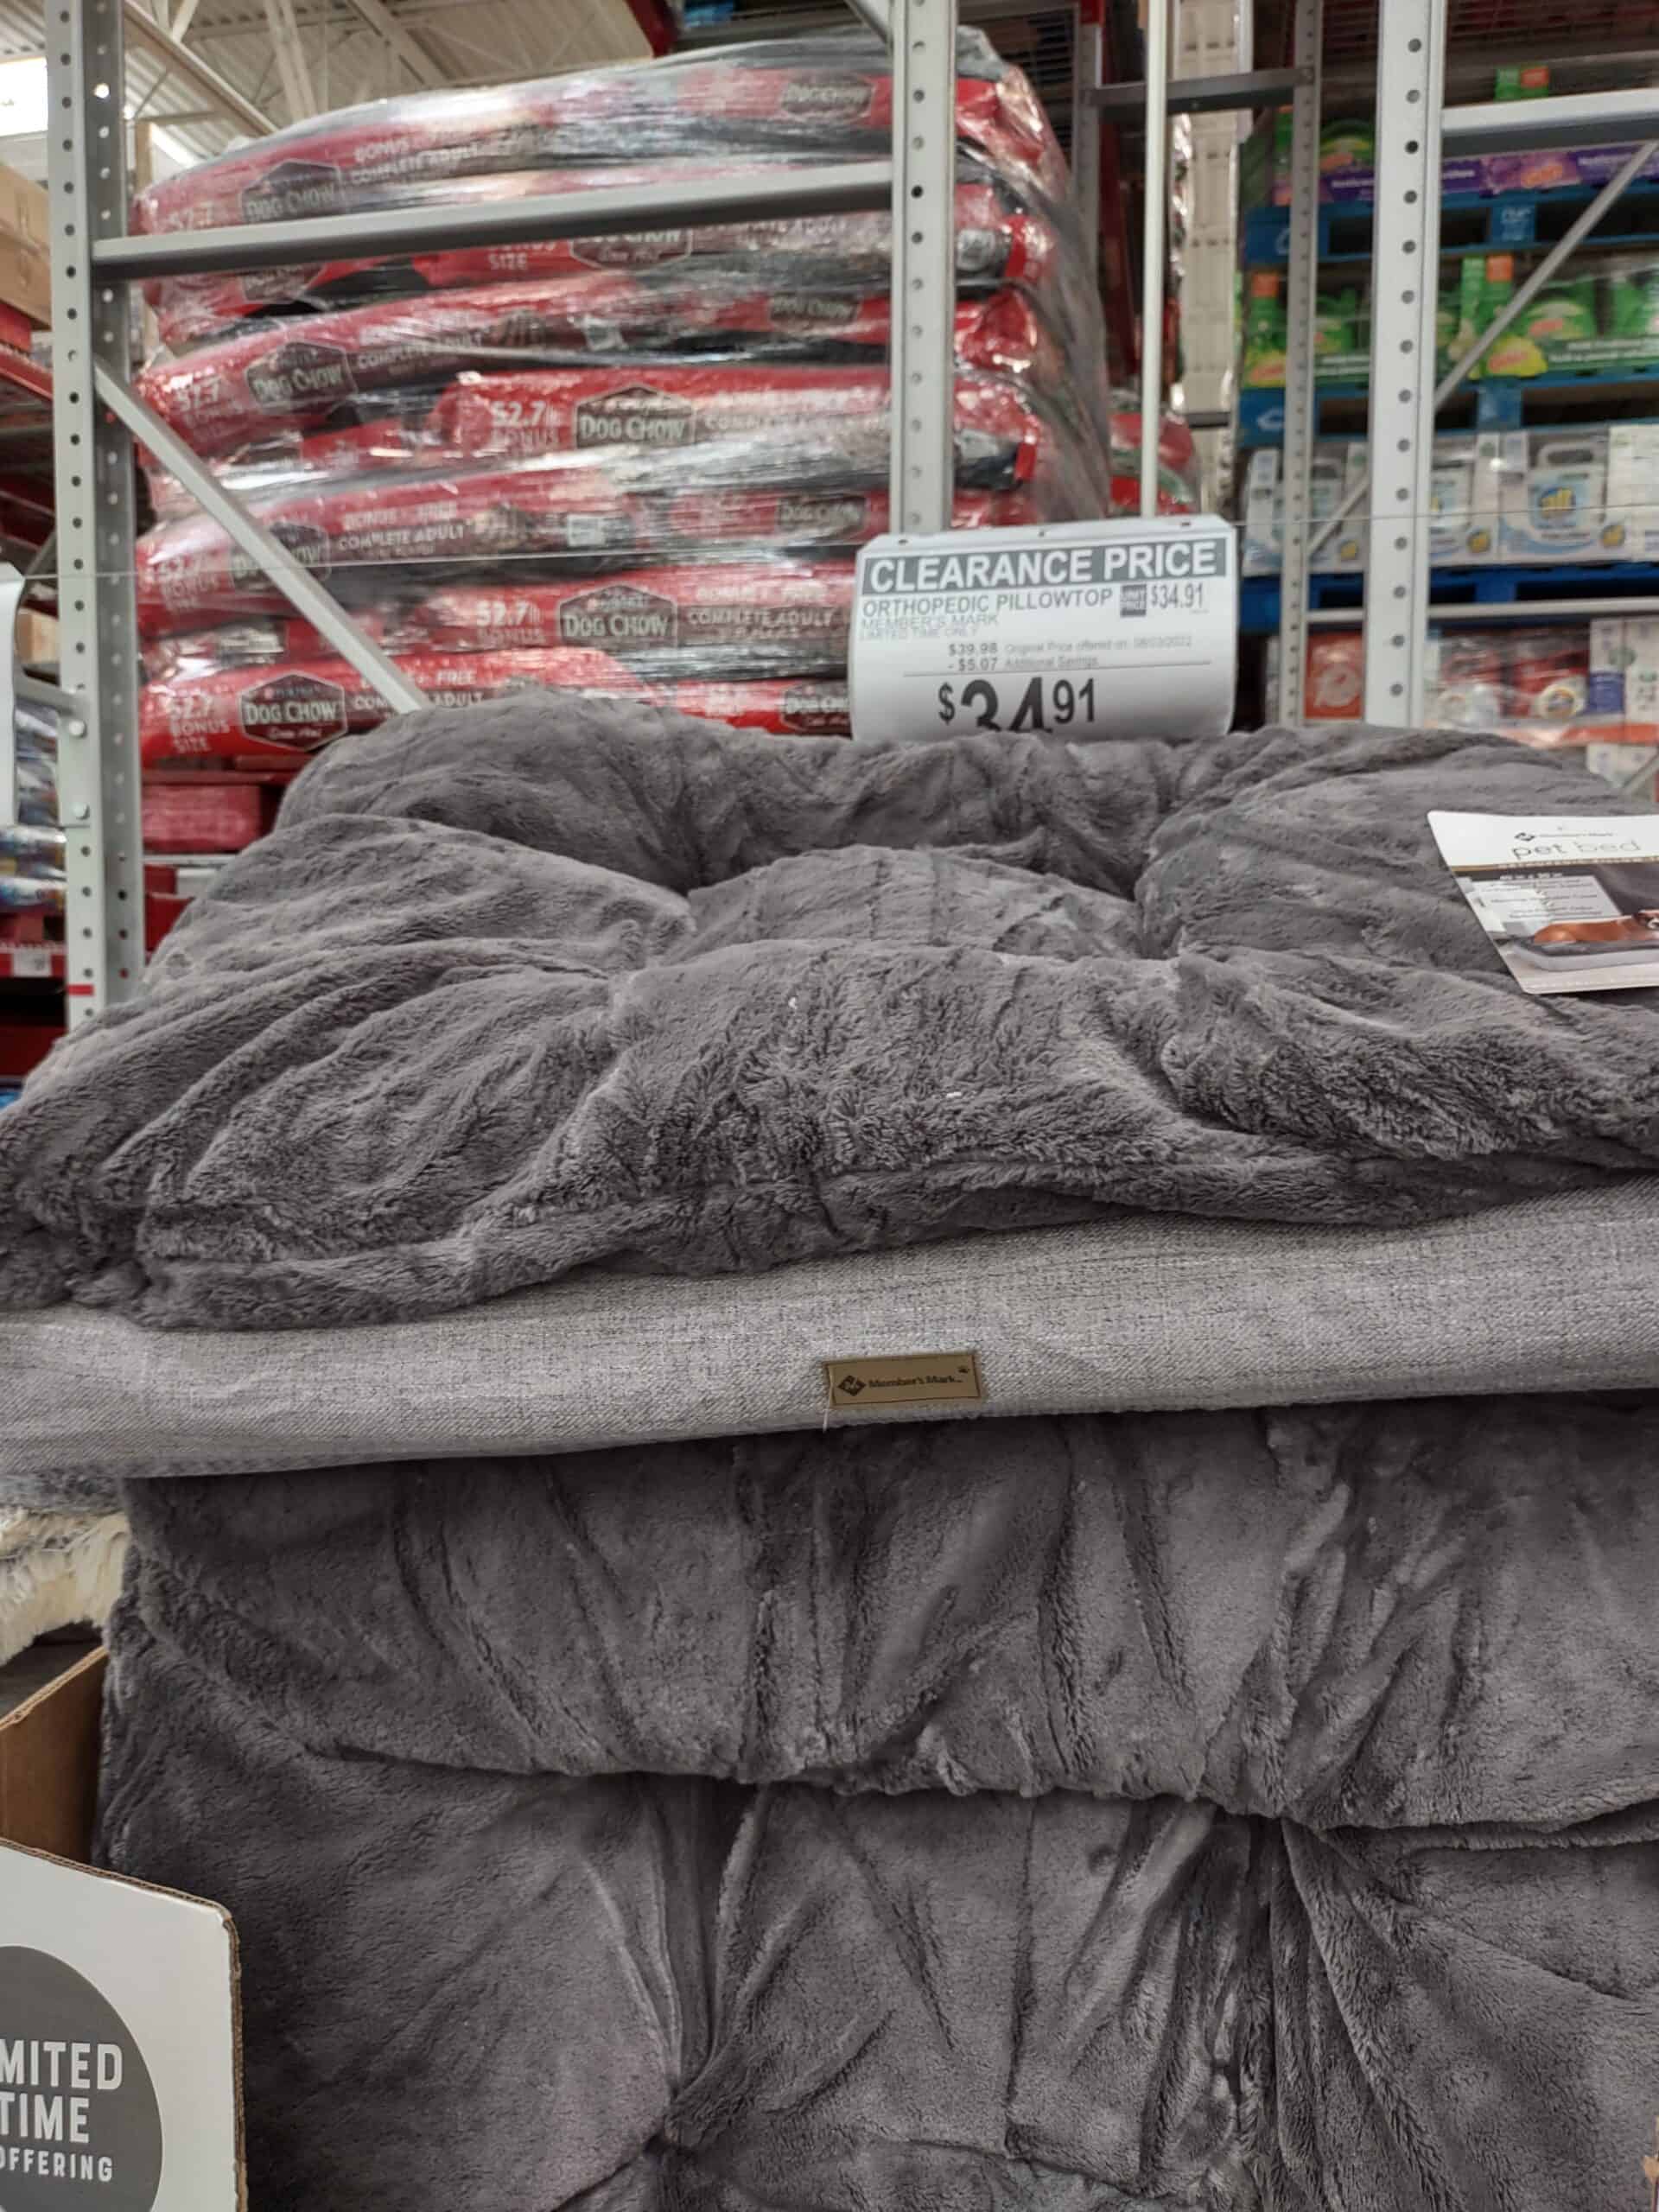 Orthopedic Pillowtop on Clearance $34.91 at Sam’s